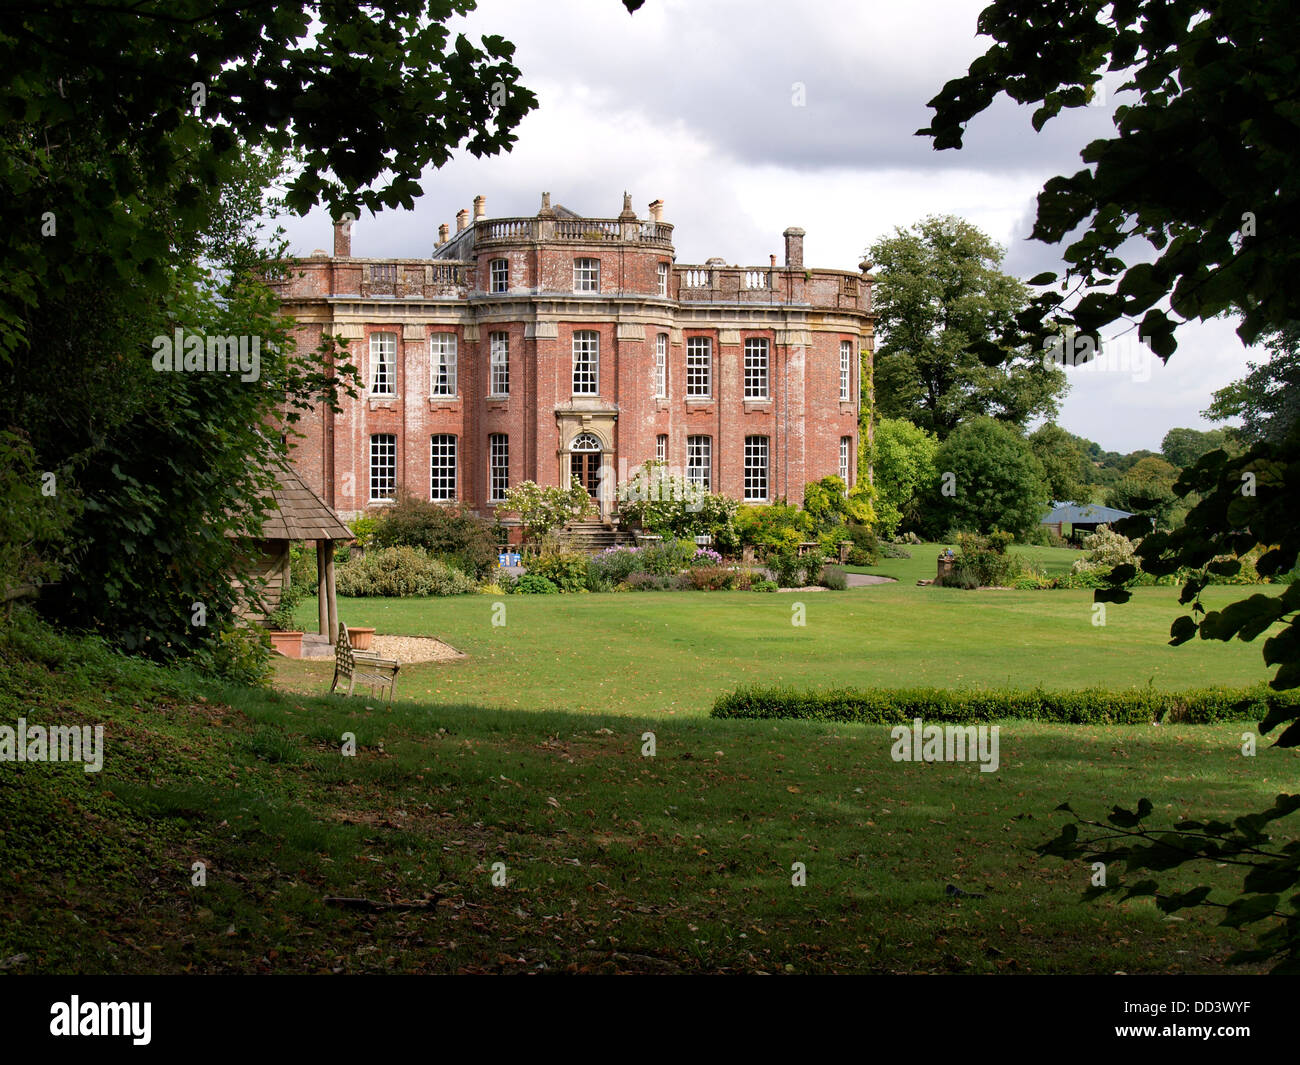 Chettle House, Queen Anne house was commissioned by the Chafin family and designed by Thomas Archer in 1710, Dorset, UK 2013 Stock Photo